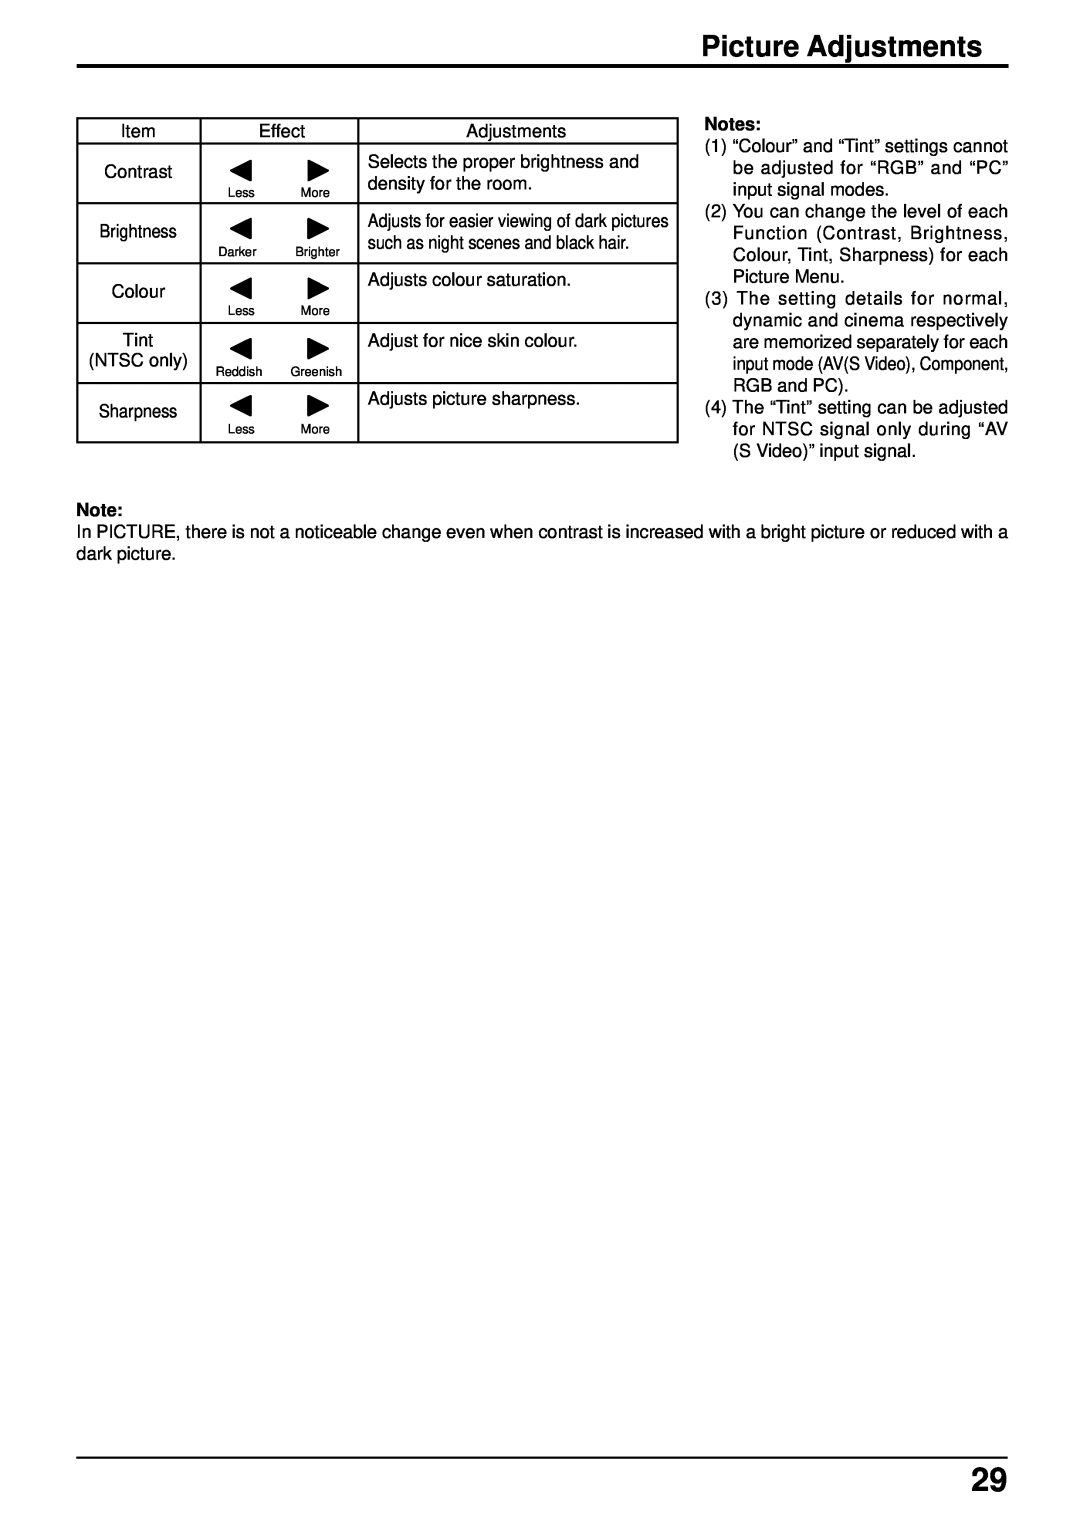 Panasonic TH-42PHW5, TH-50PHW5 manual Picture Adjustments 